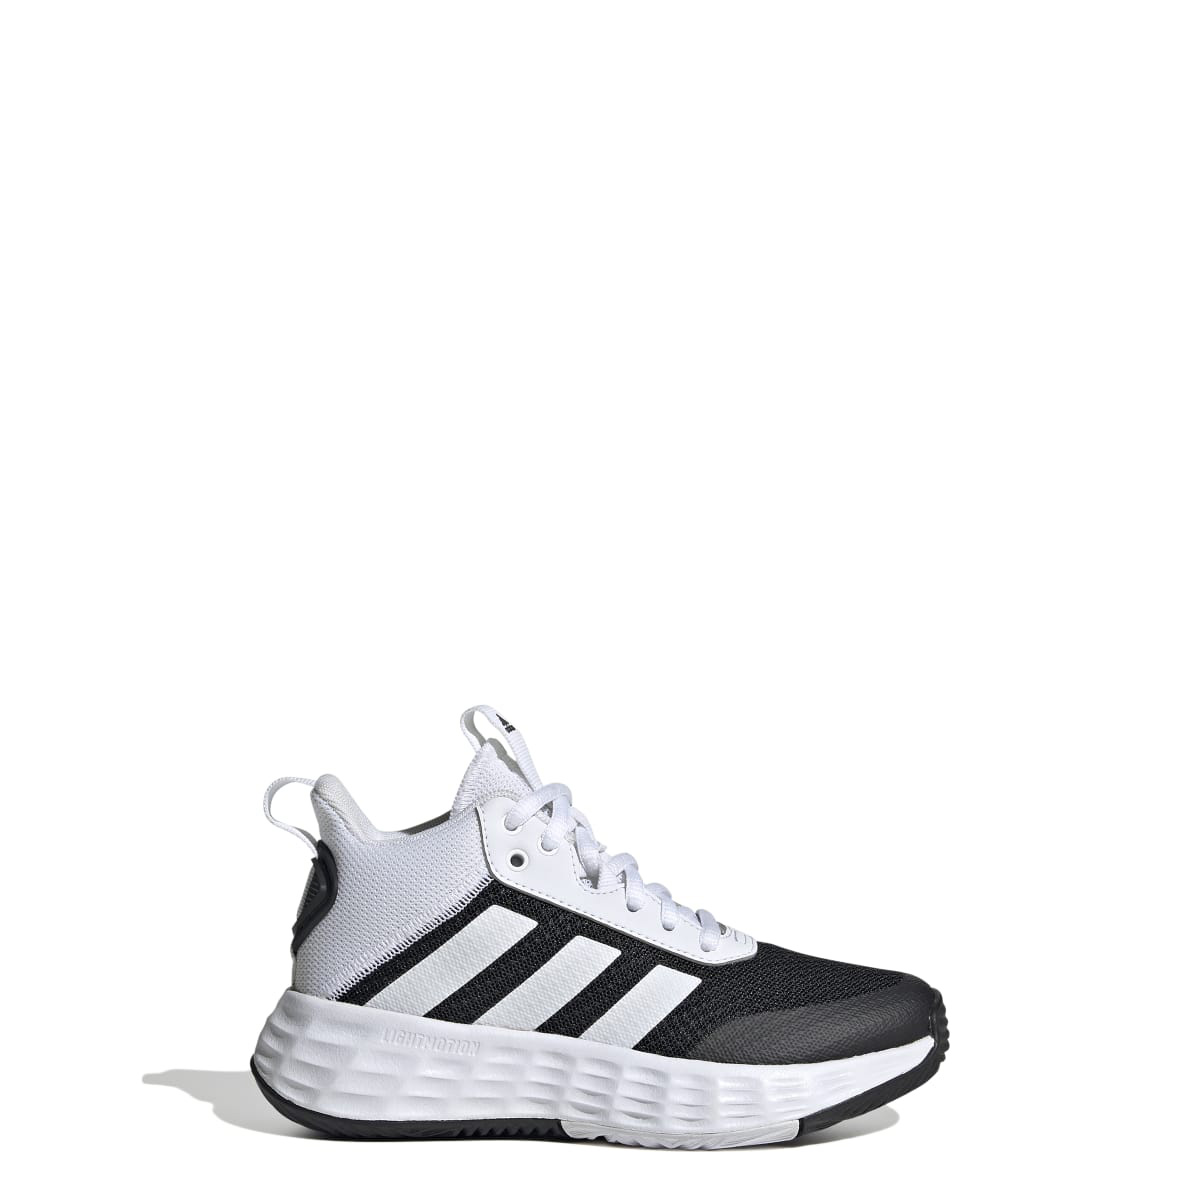 adidas Youth Shoes Basketball Ownthegame 2.0 School Grade